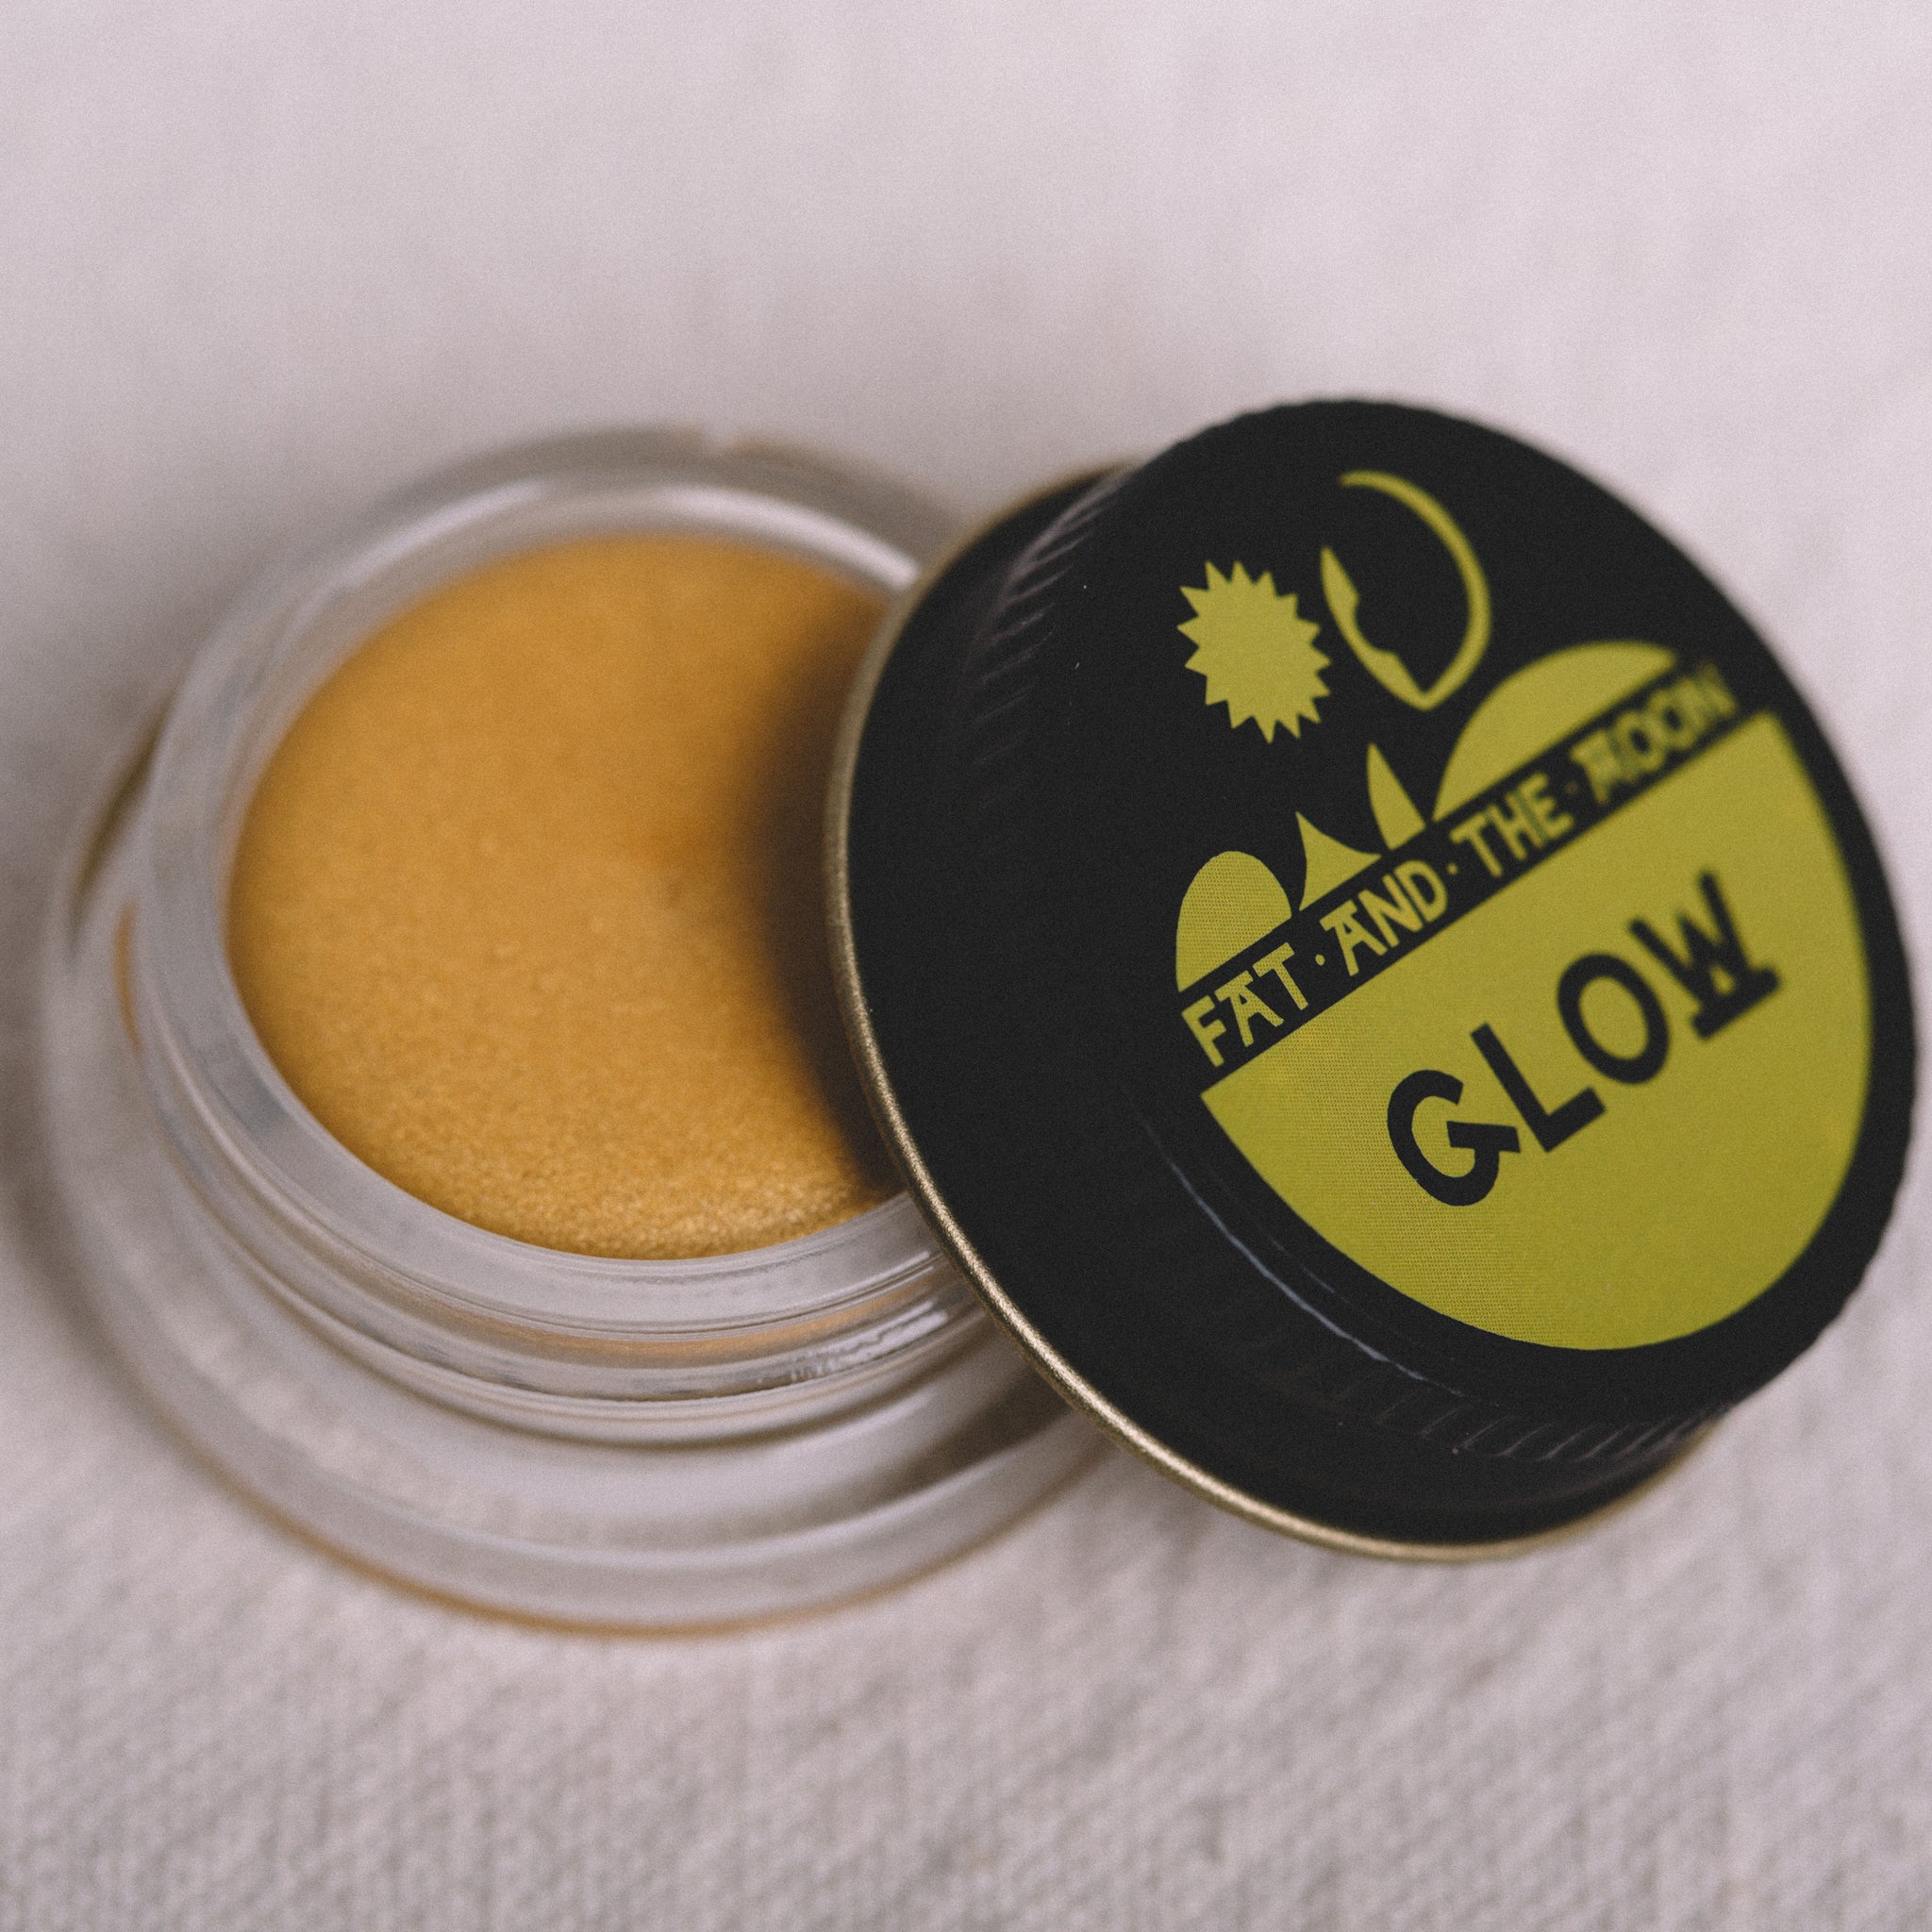 GLOW SHIMMER || FAT AND THE MOON